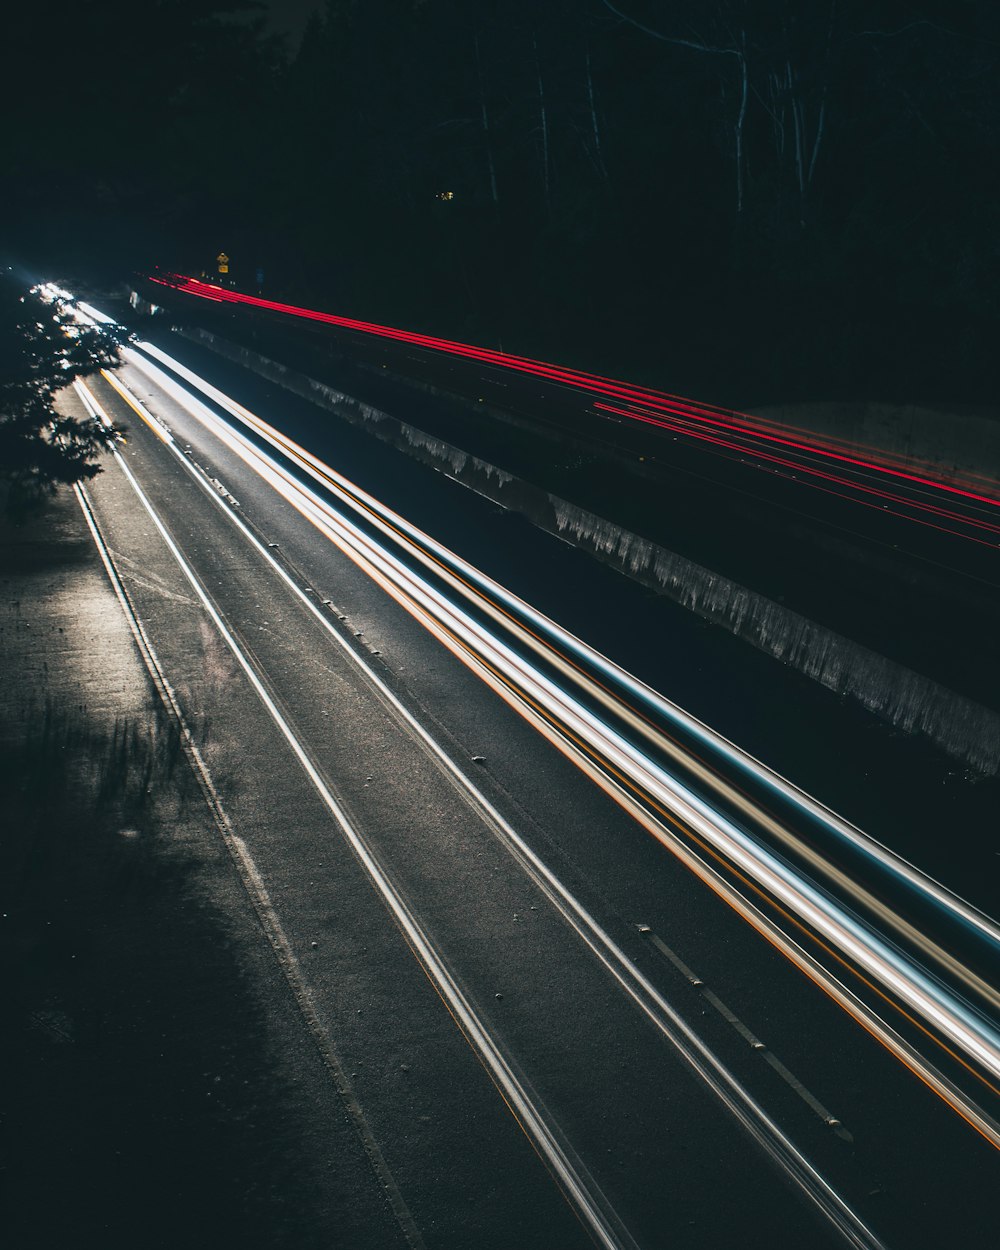 time lapse photography of cars running on road at night